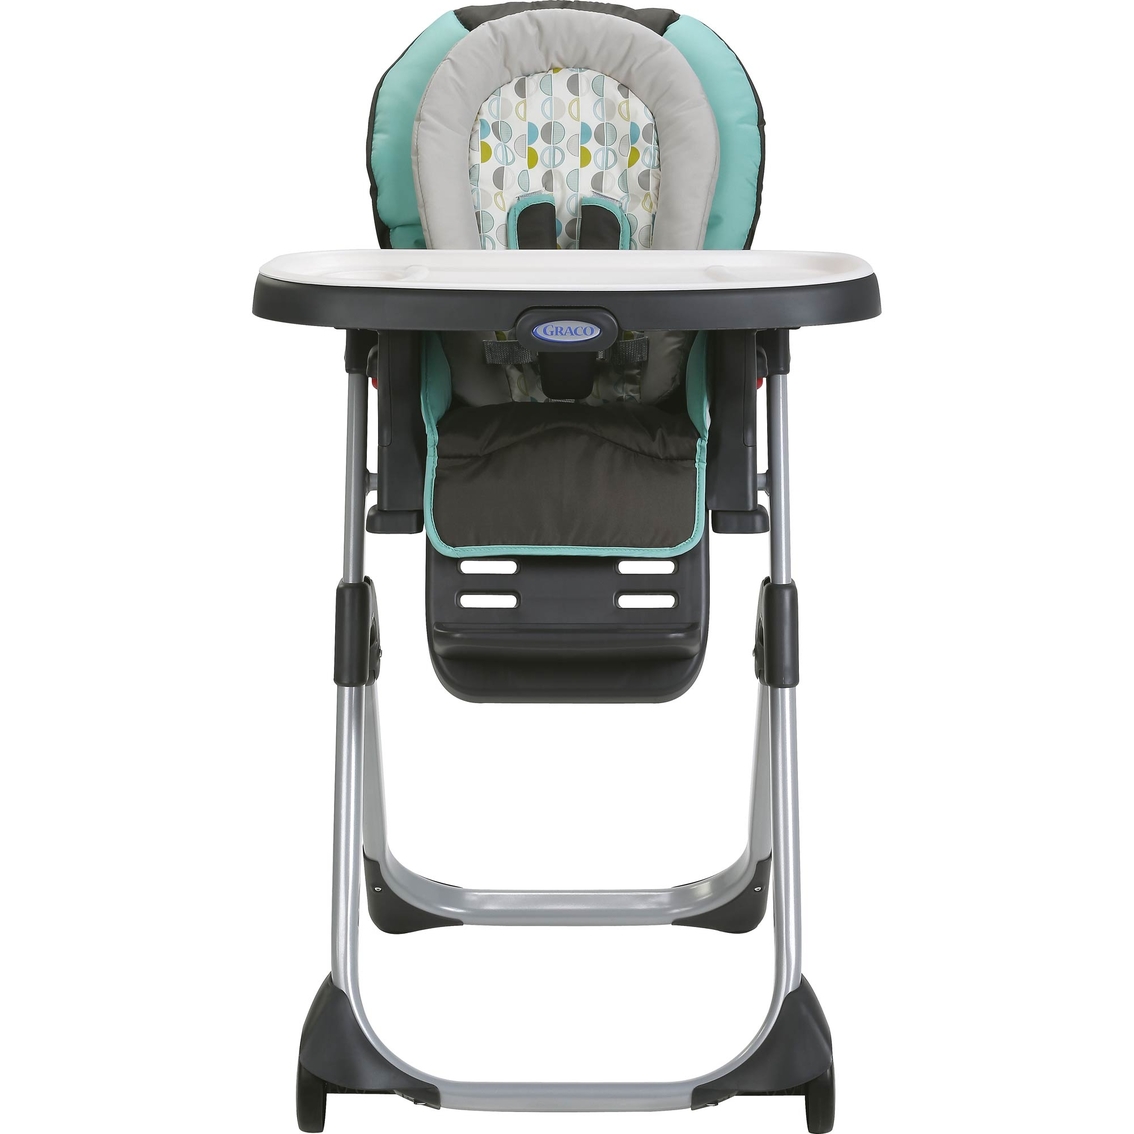 Graco DuoDiner LX Highchair - Image 2 of 3